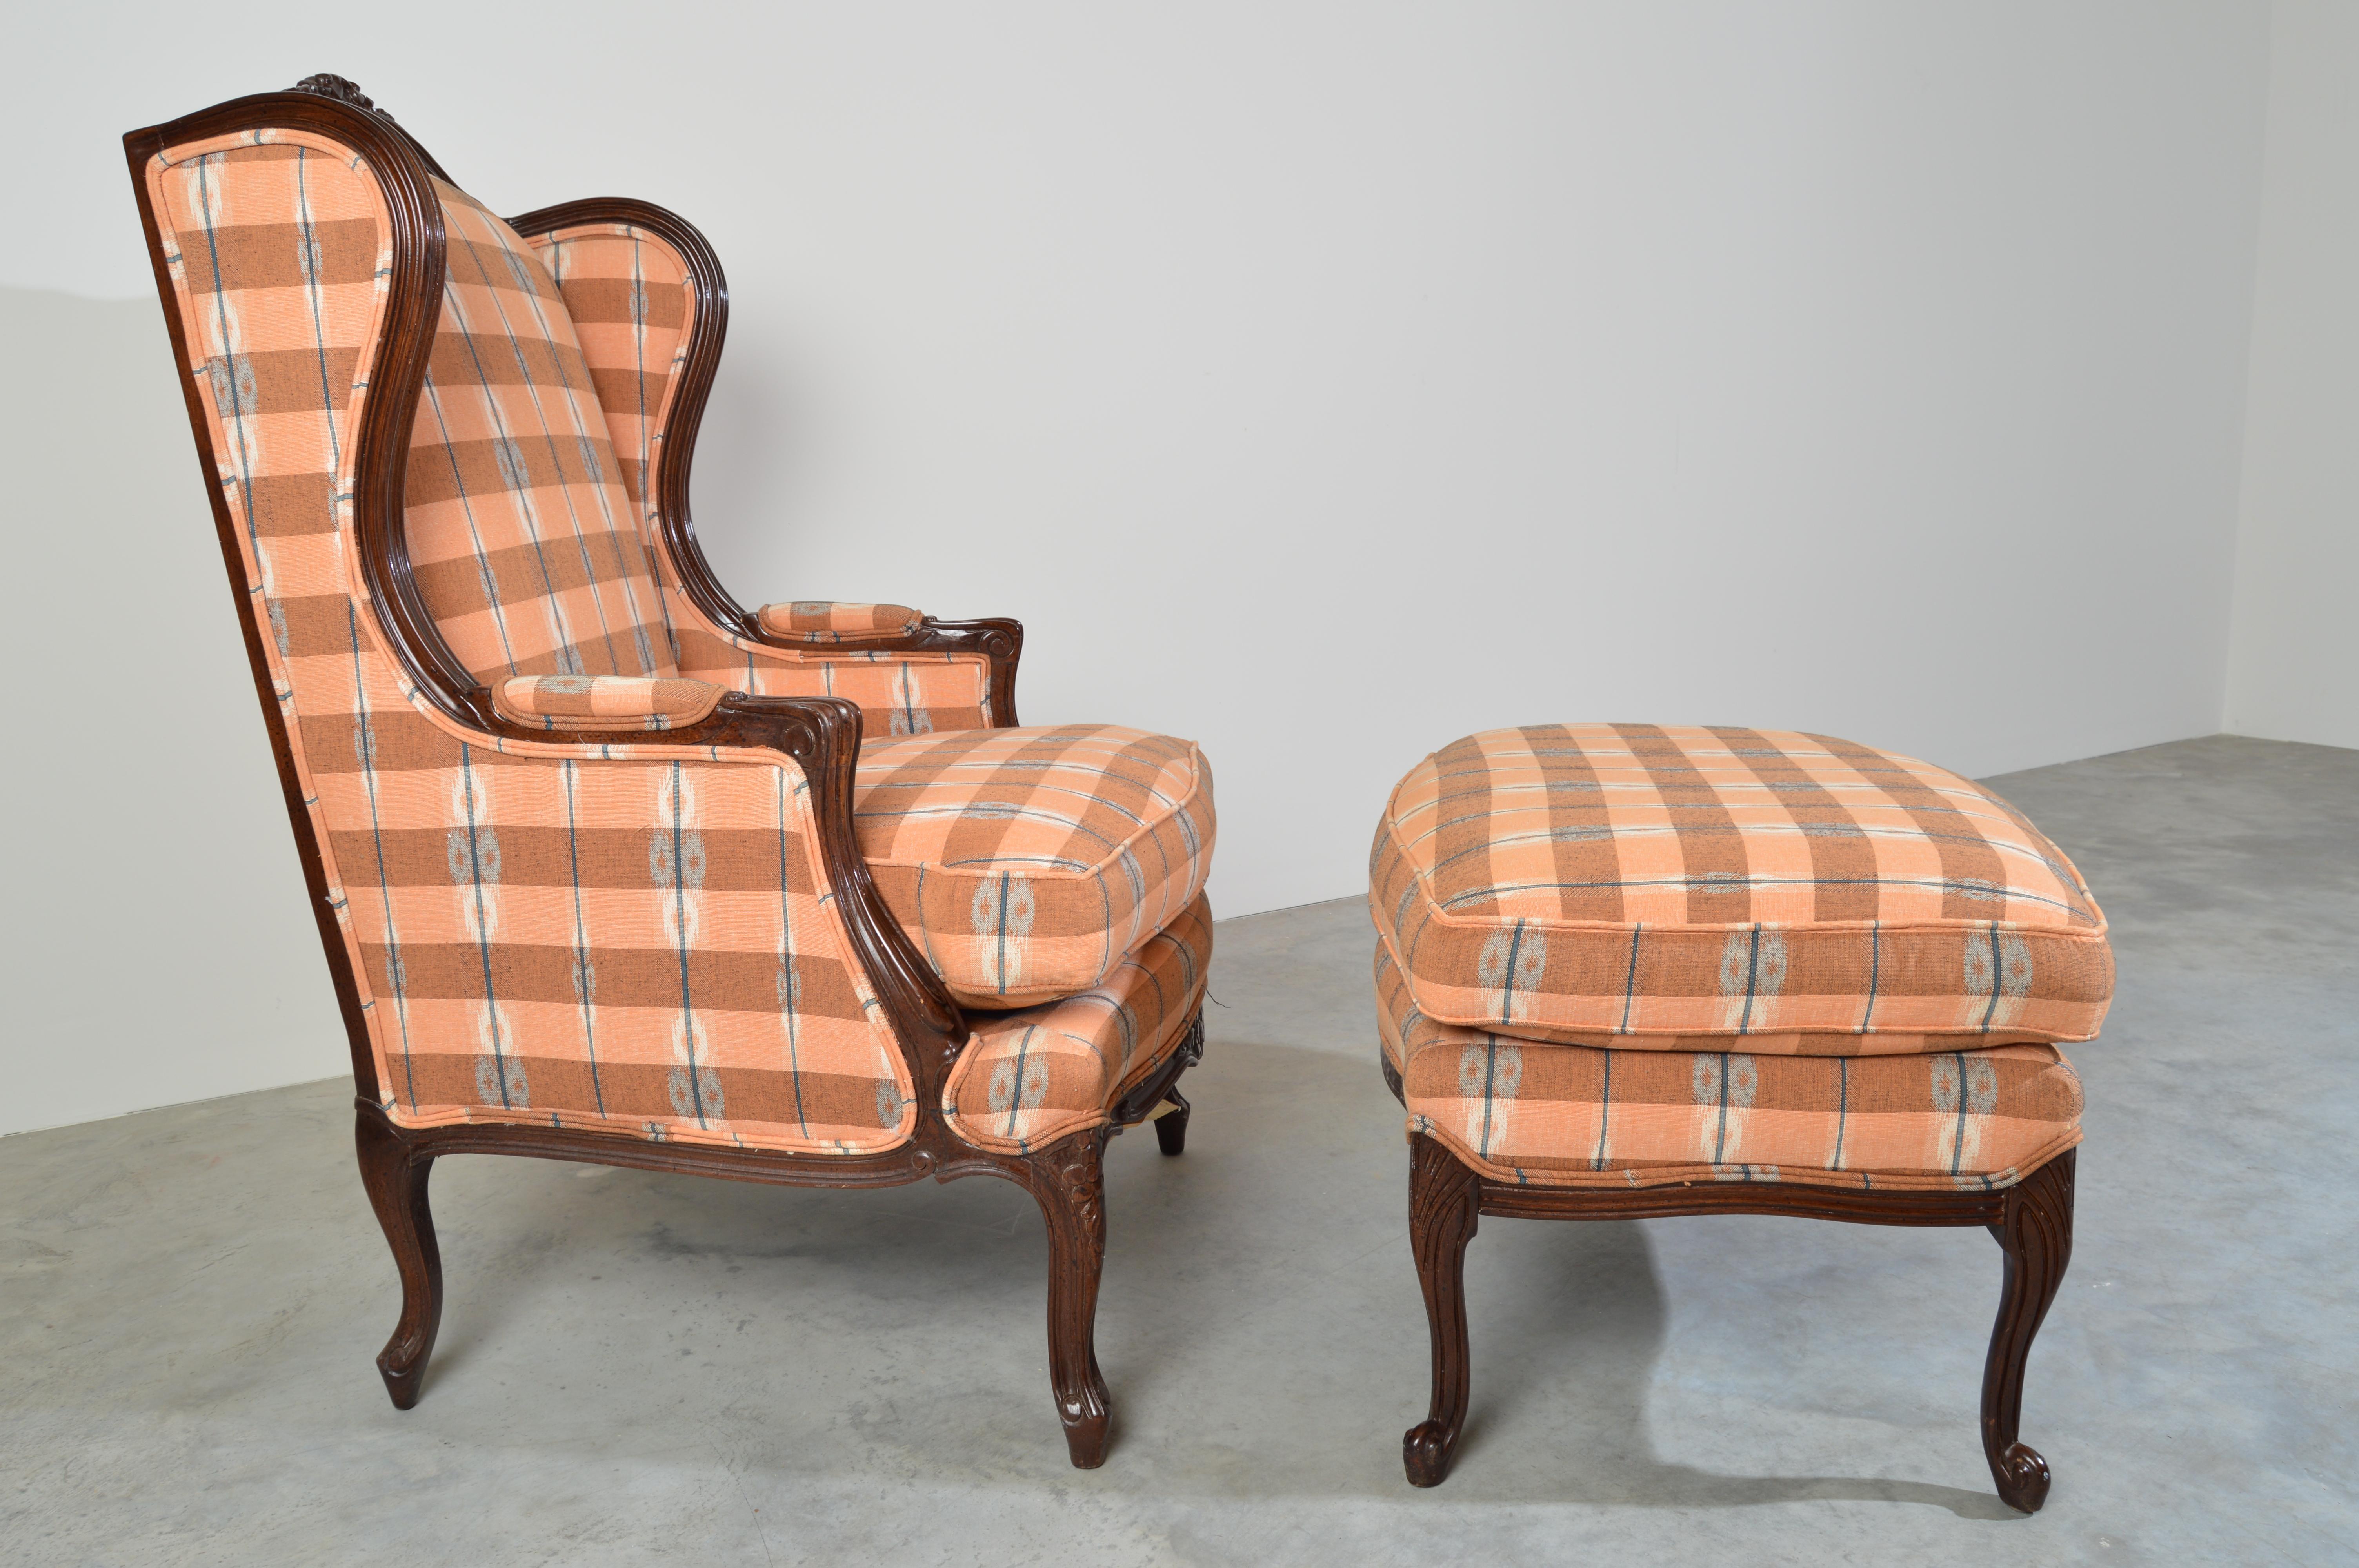 Hickory chair Company Louis XV style walnut wingback chair and ottoman having Pendleton style Ikat plaid upholstery. Classical French Louis XV style wingback chair and ottoman by Hickory Chair Company. The chair features beautifully carved hardwood